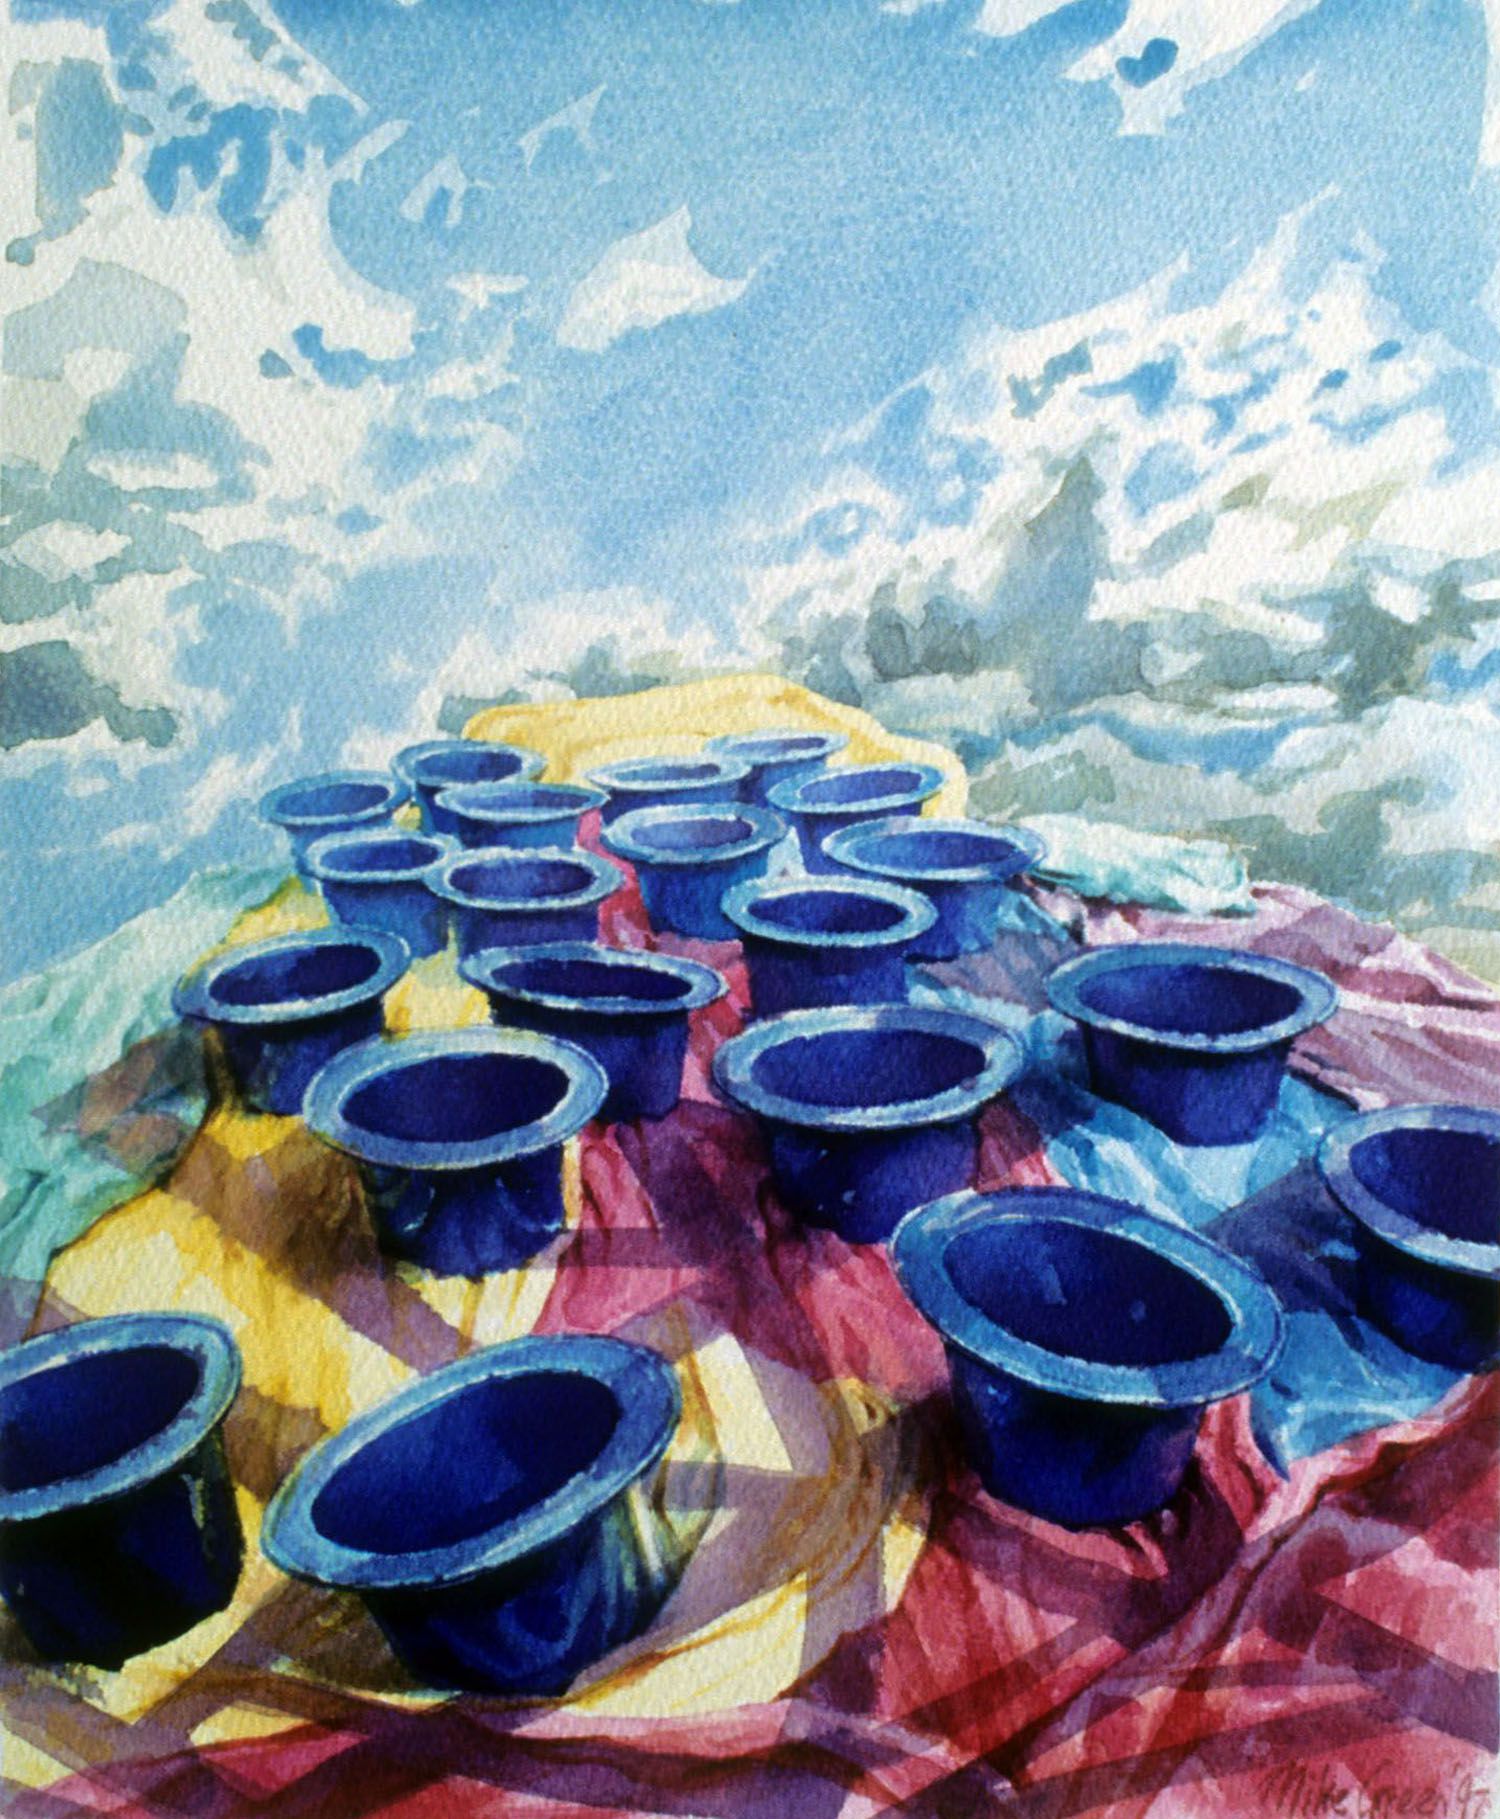 "Blue plastic hats from the sky" 1997. Watercolour on 300gms. Arches paper. 33.5 x 27cm